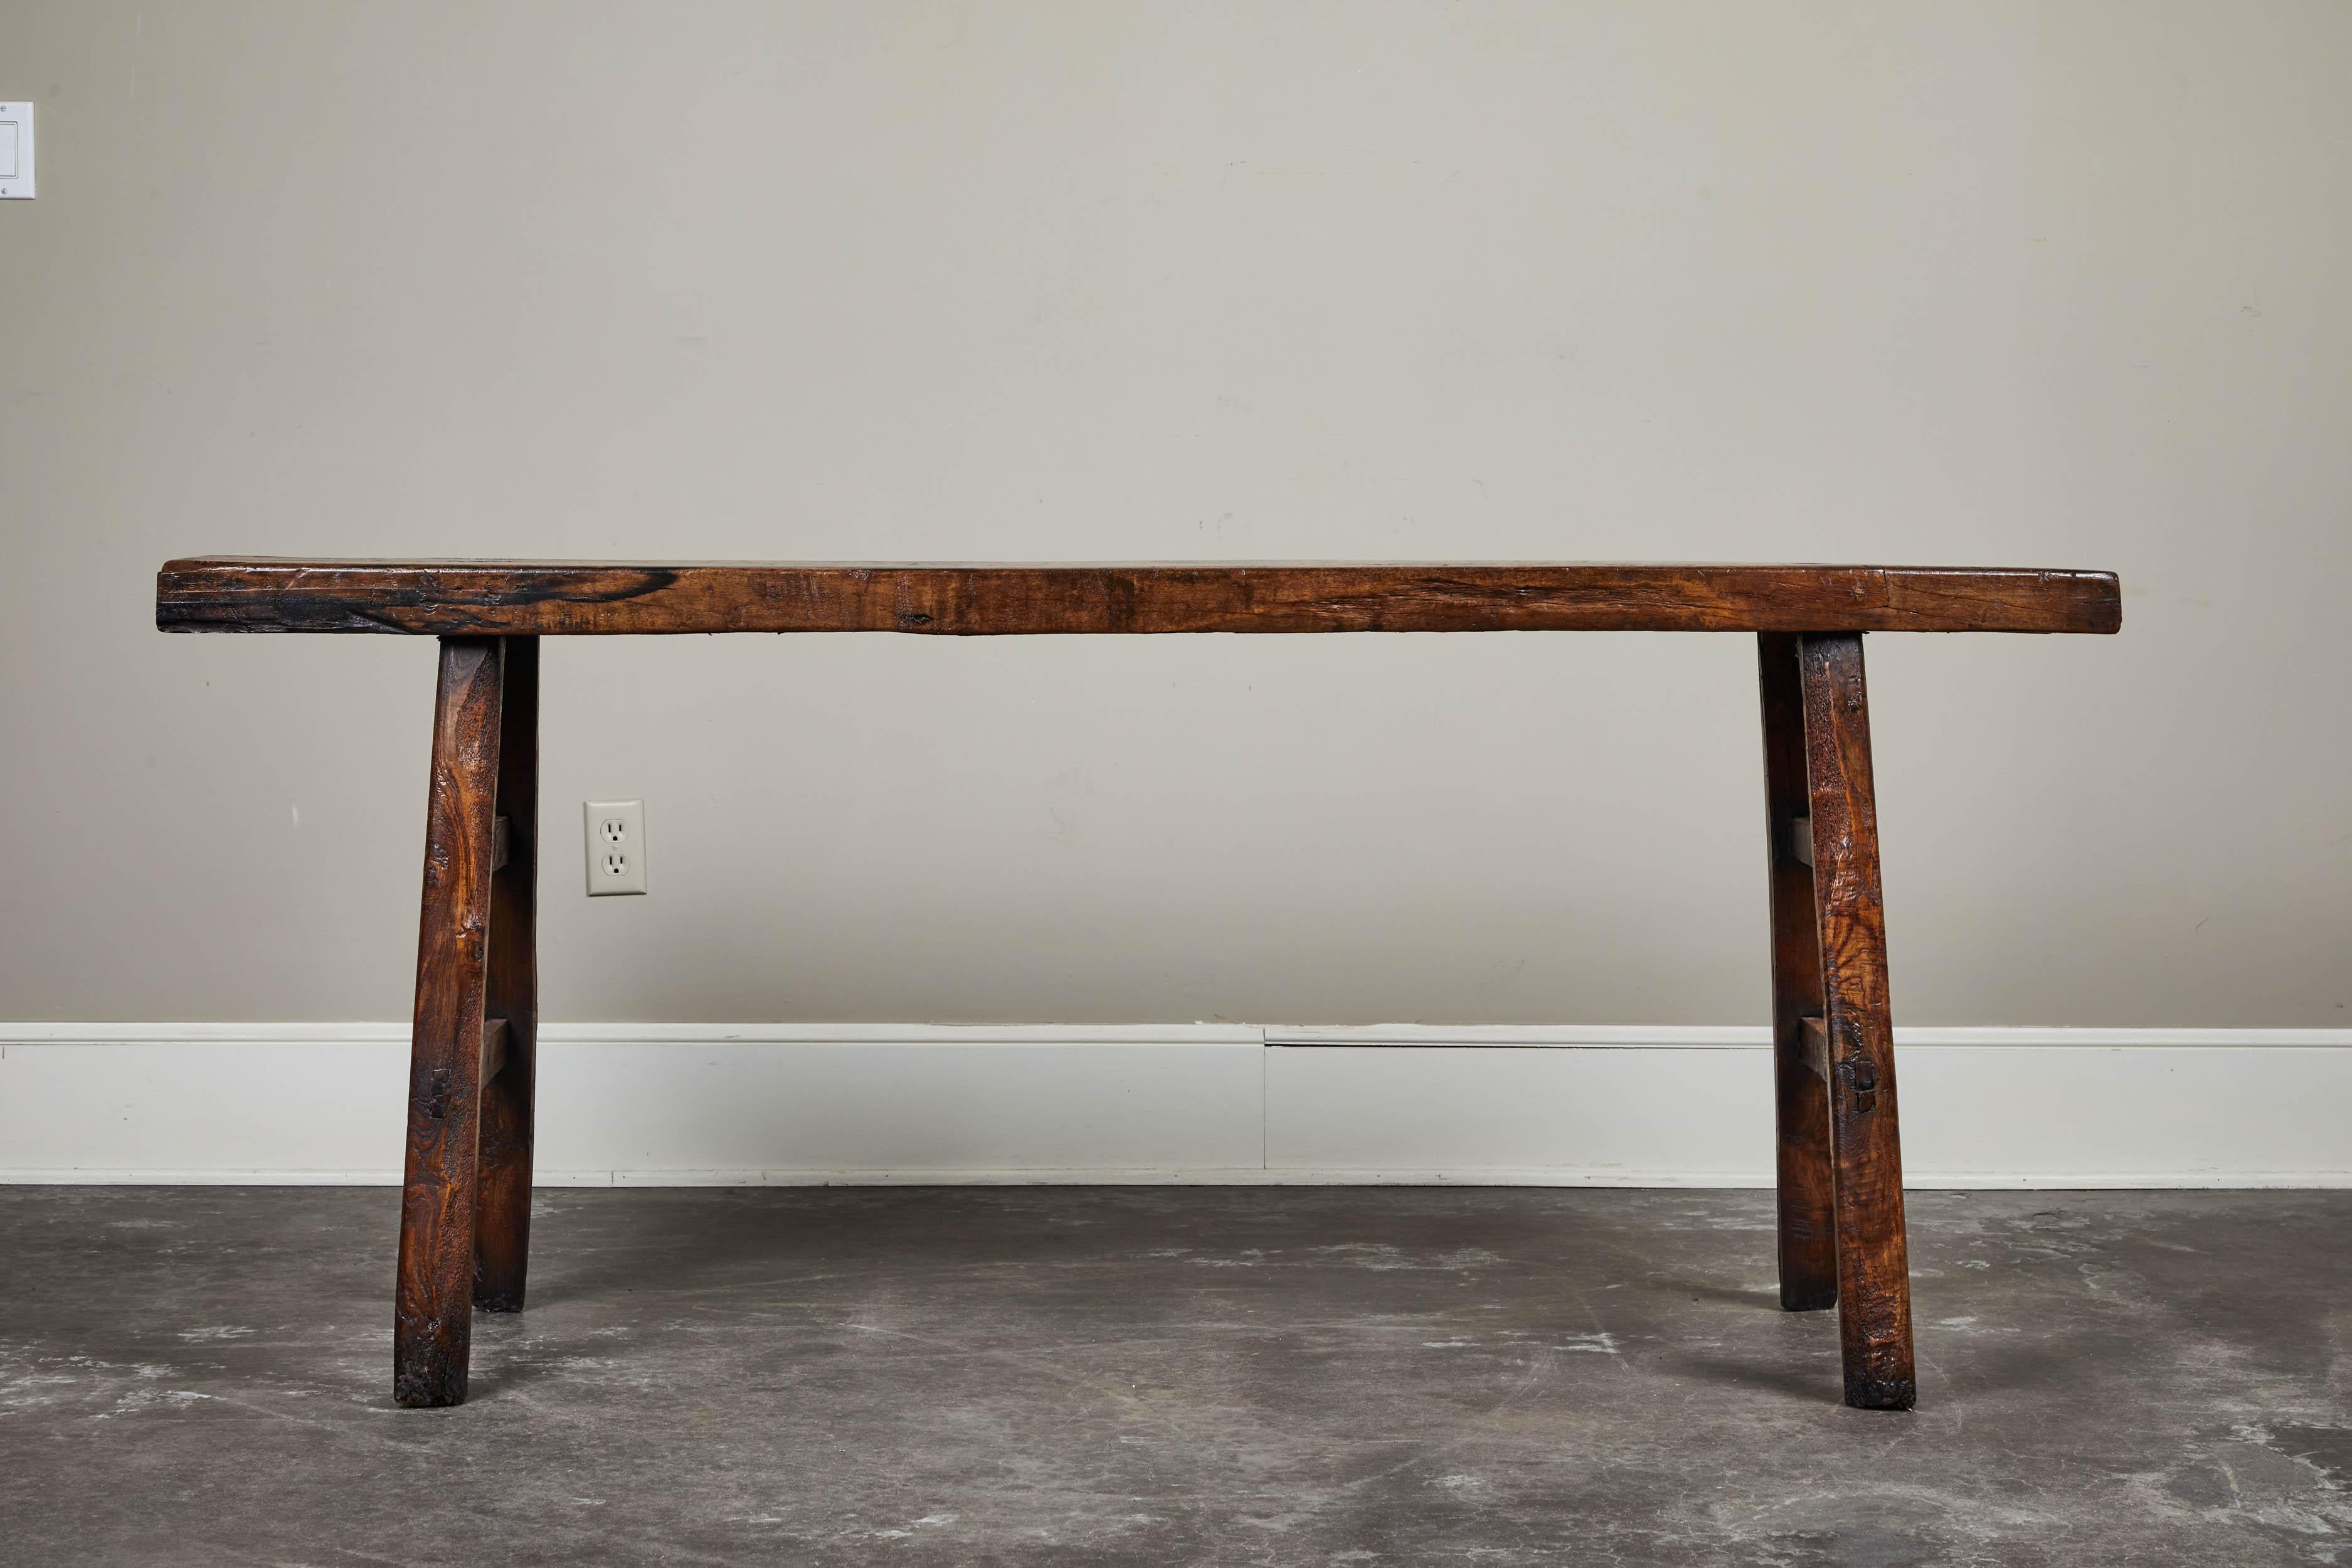 18th century Chinese figured poplar altar table with splayed elm legs from Shanshi.